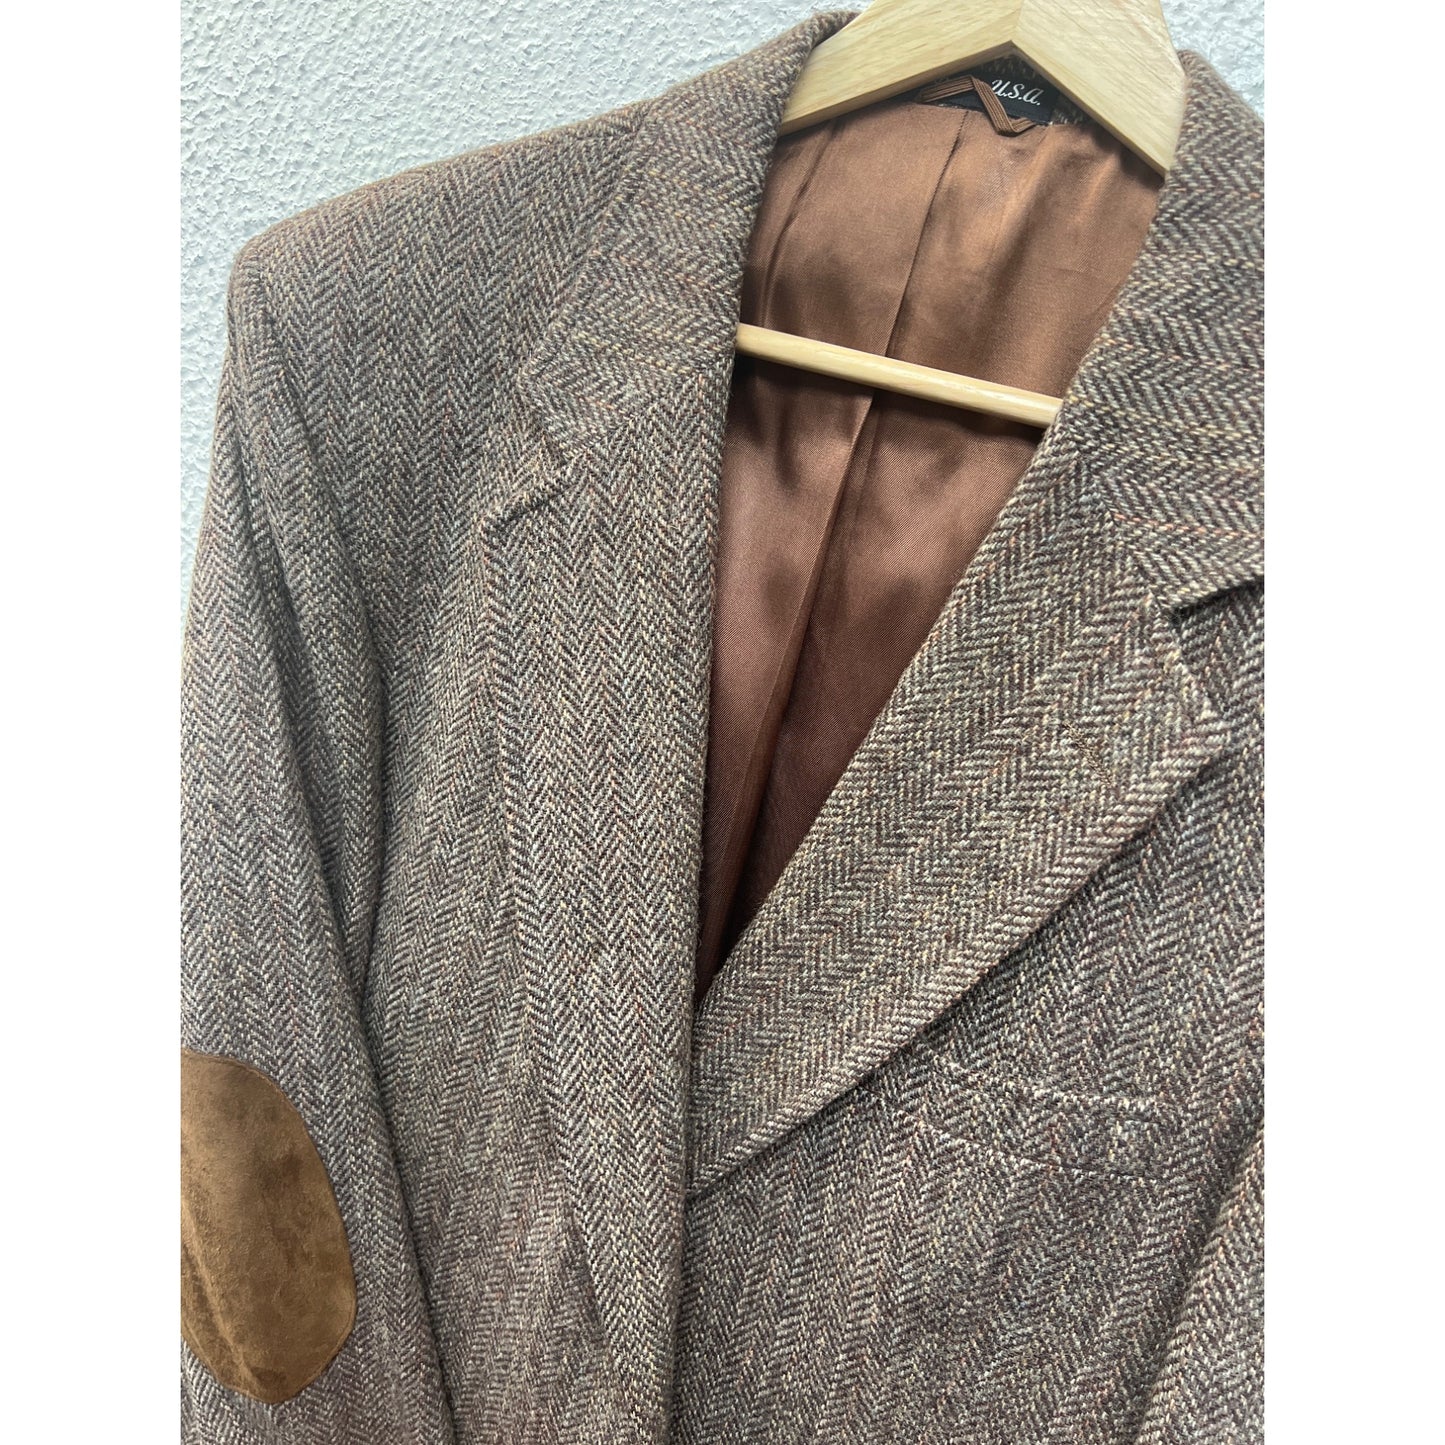 Stafford Hampshire Vintage Brown Wool Blazer with Faux Suede Elbow Patches